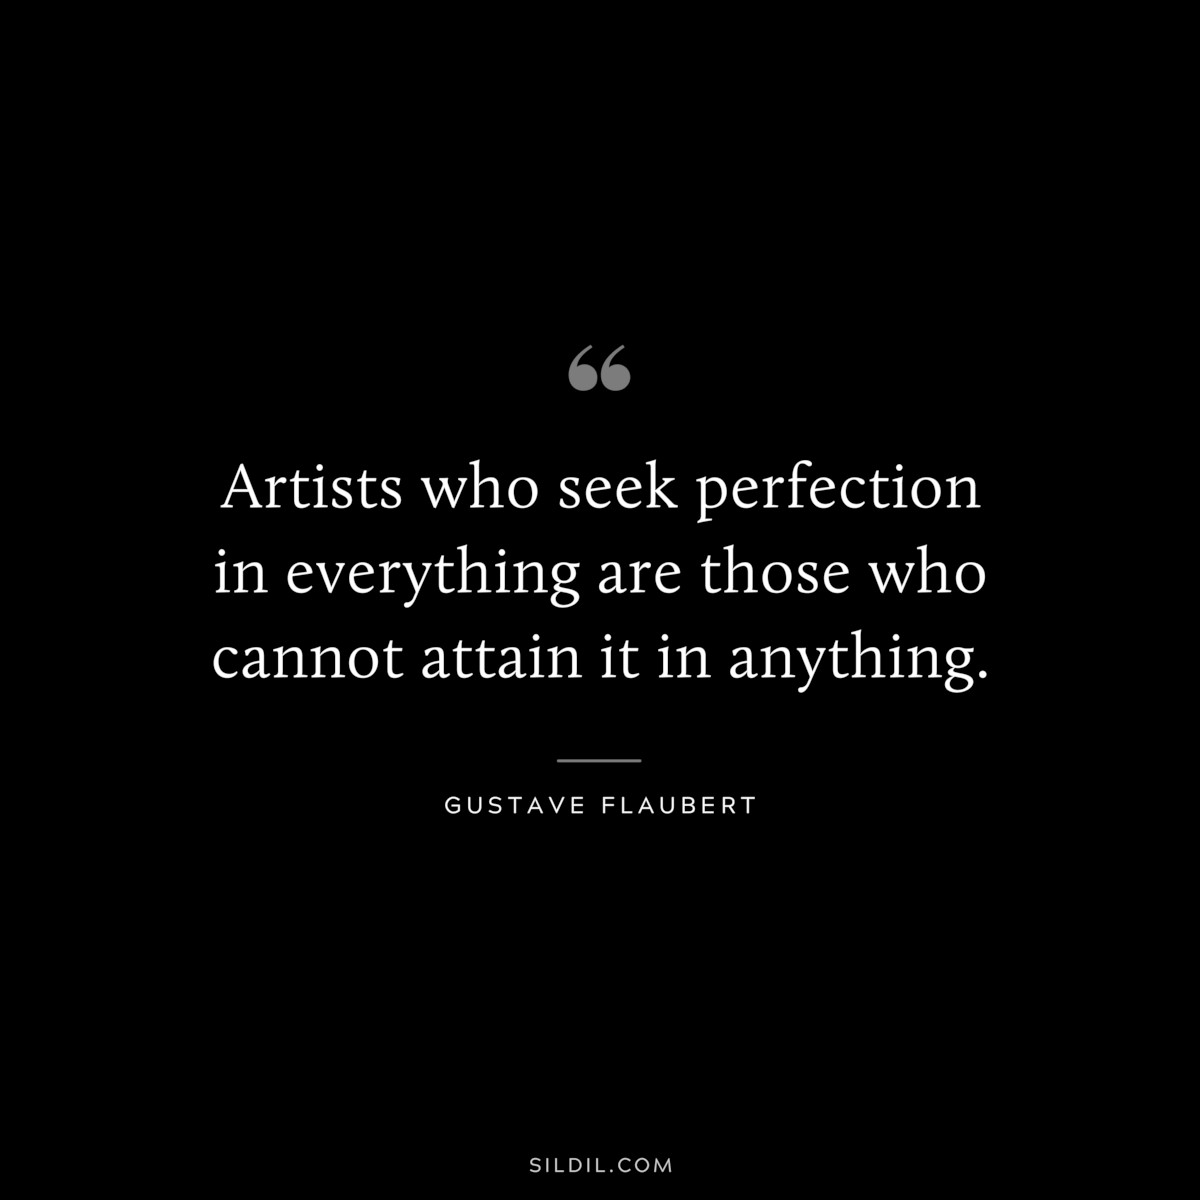 Artists who seek perfection in everything are those who cannot attain it in anything. ― Gustave Flaubert